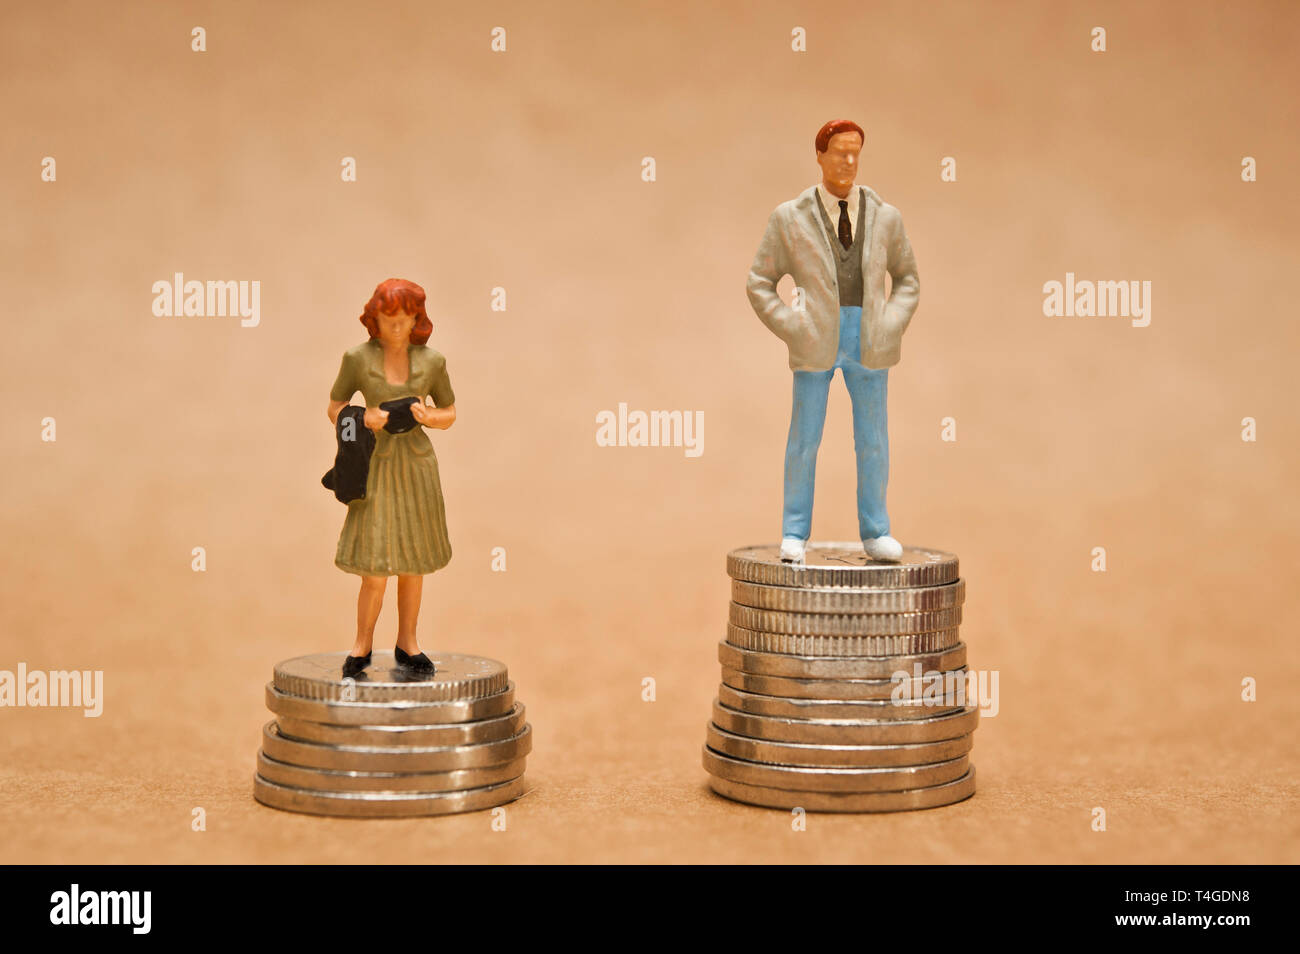 man and woman figurine standing on coins, gender pay gap concept Stock Photo